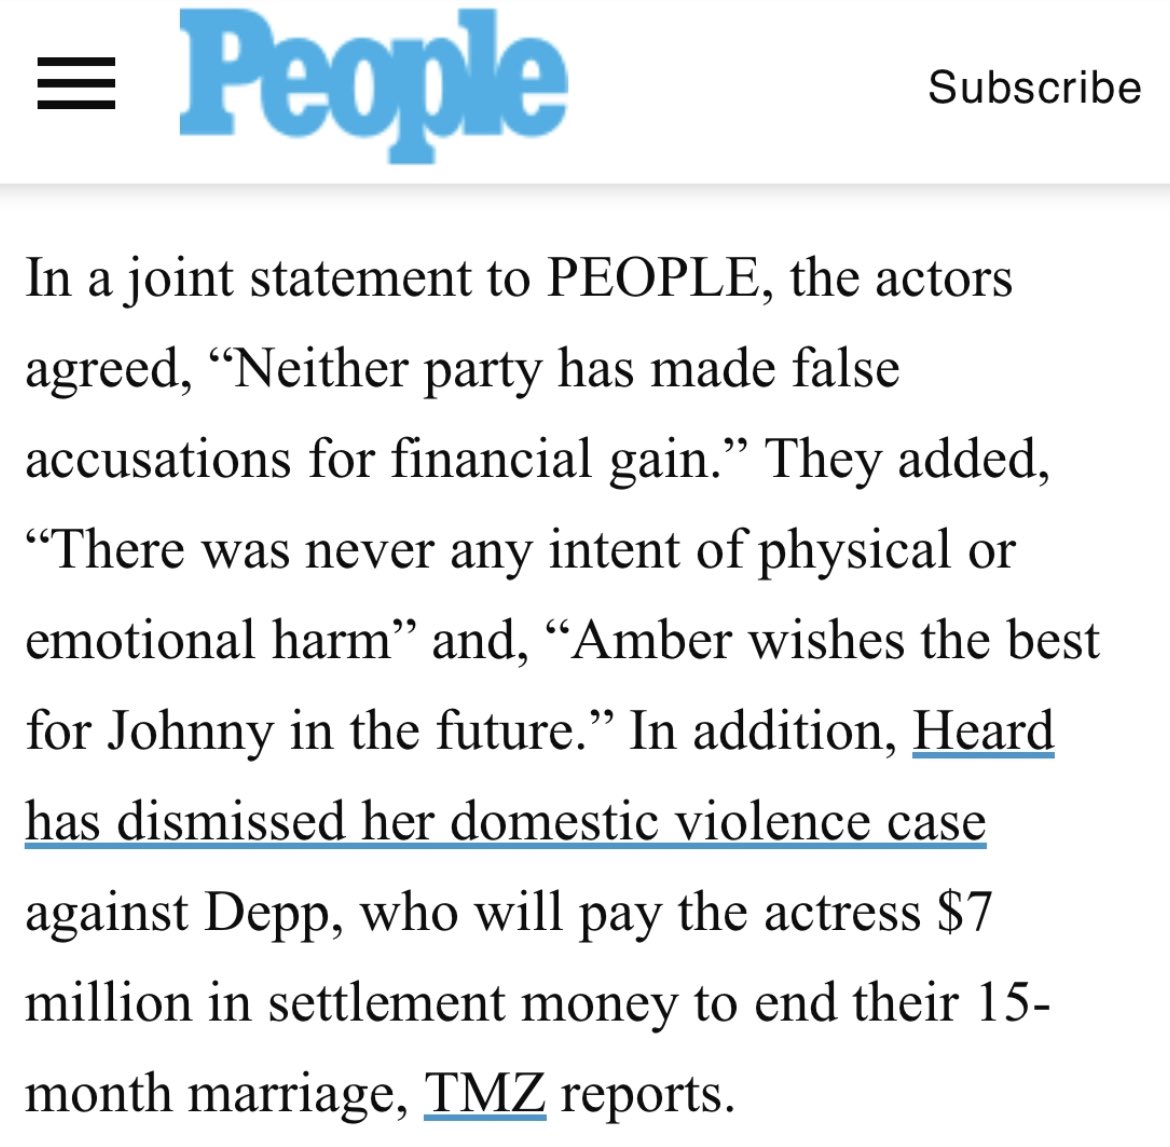 On August 16 2016 Depp and Heard settle their divorce. As part of the settlement, Heard withdraws her request for a domestic violence order of protection and accepts $7M. The couple release a joint statement declaring “neither party has made false accusations for financial gains”